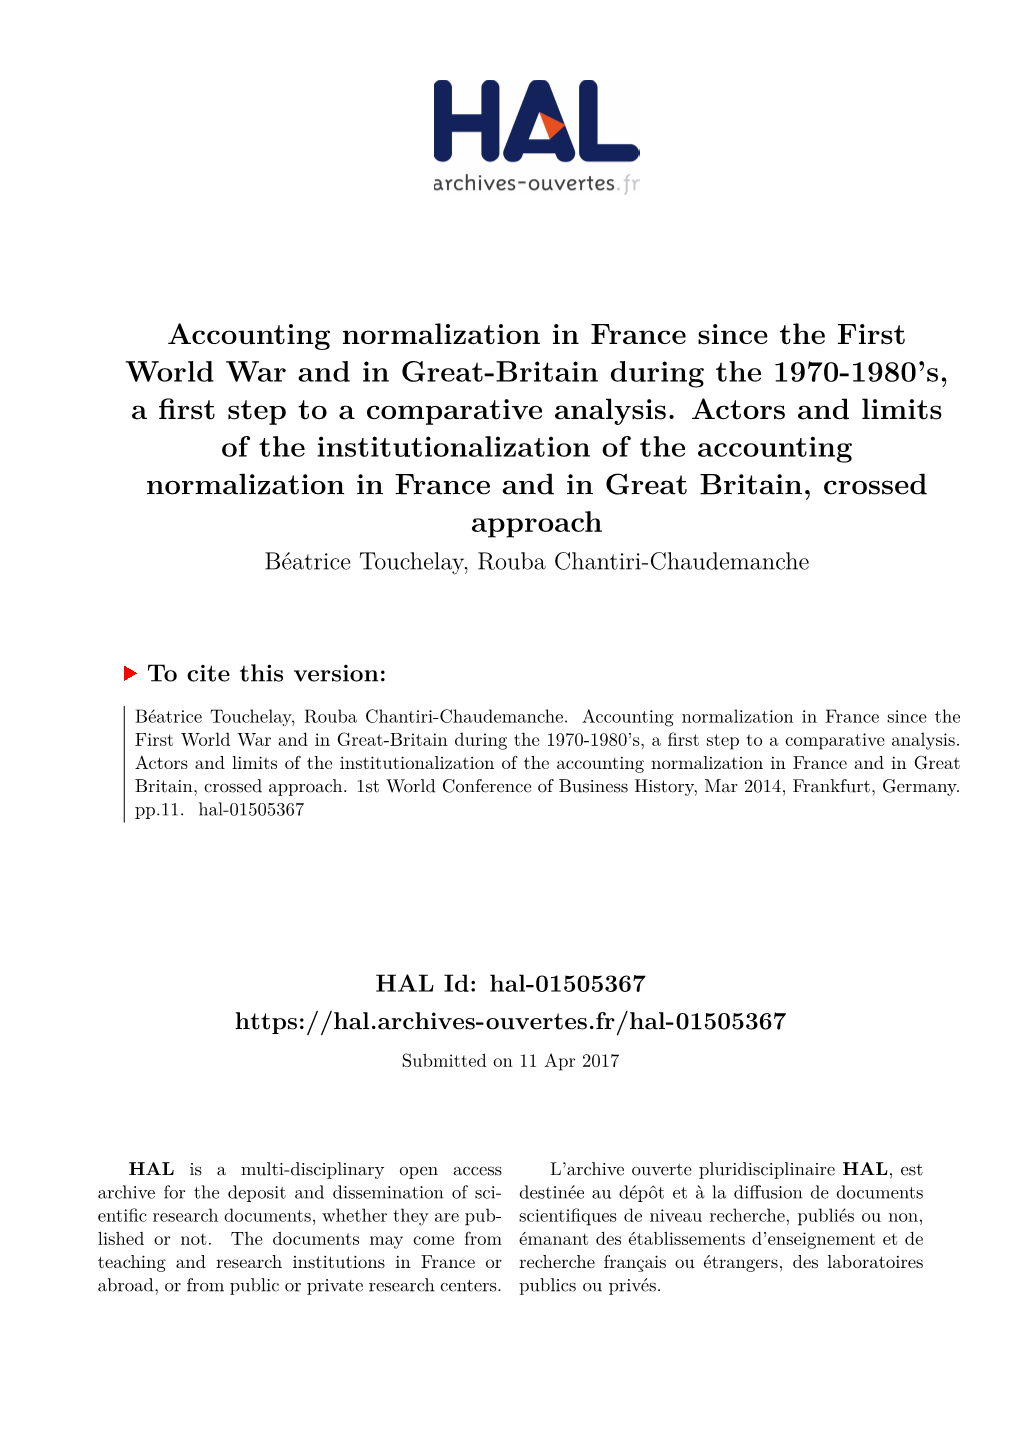 Accounting Normalization in France Since the First World War and in Great-Britain During the 1970-1980'S, a First Step to A